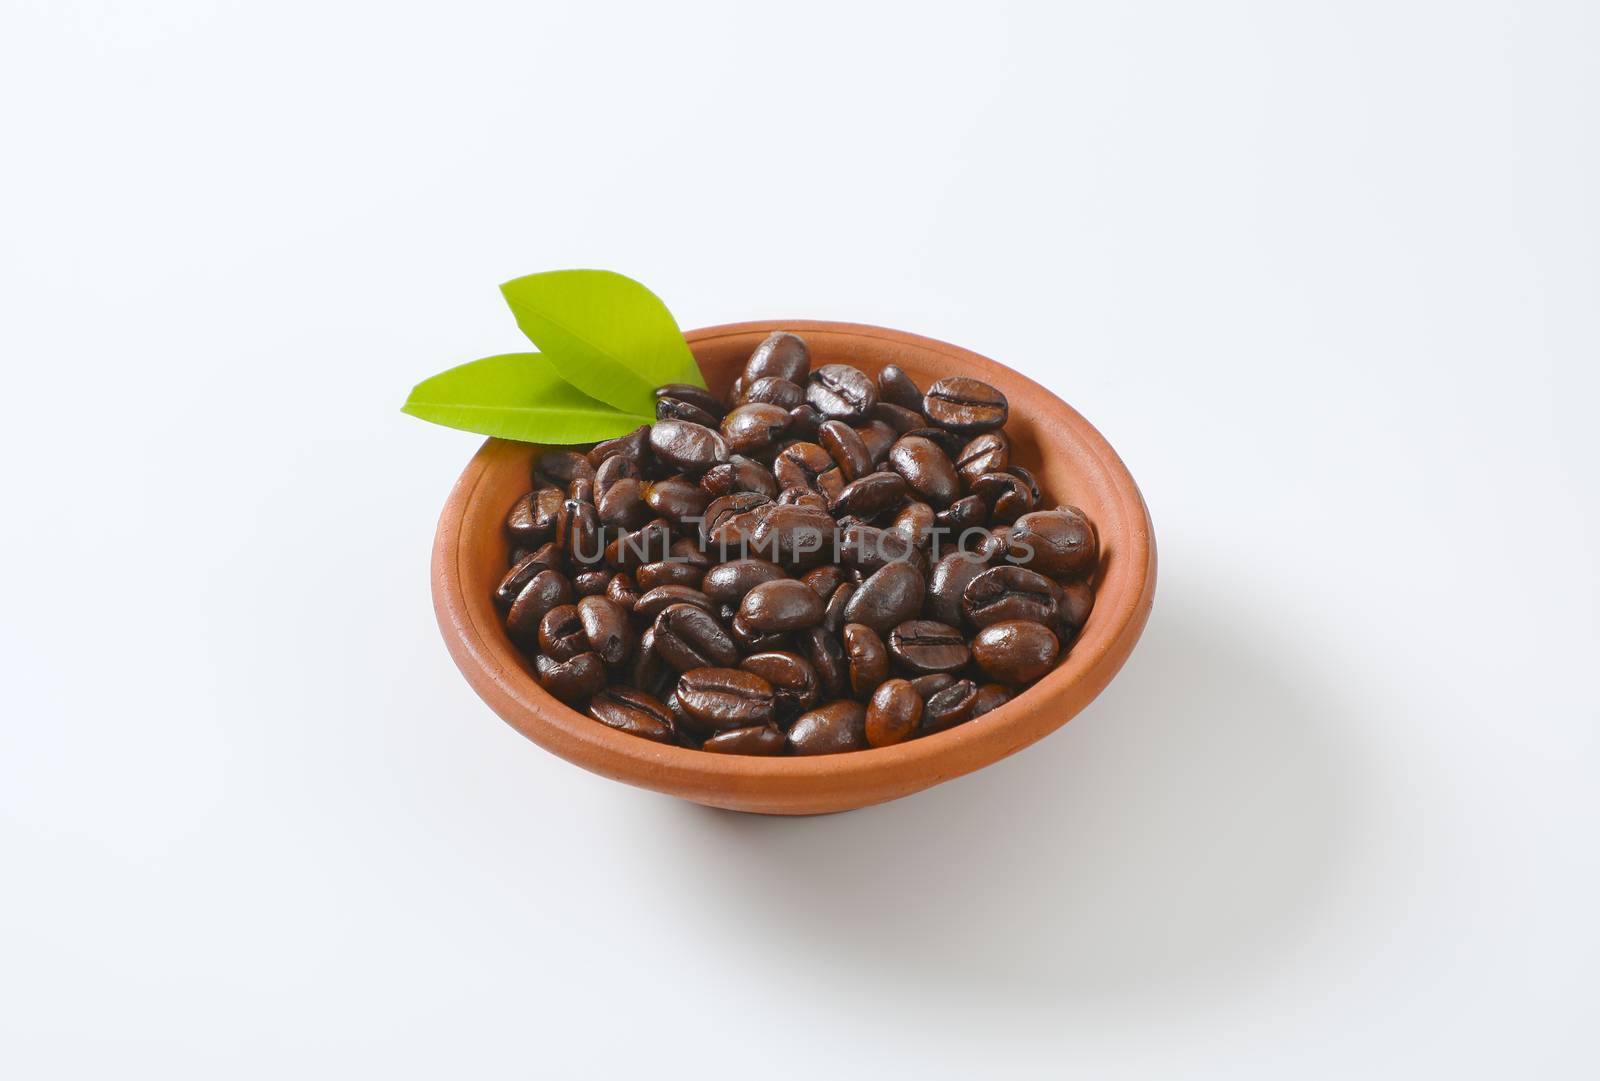 Roasted coffee beans in terracotta bowl